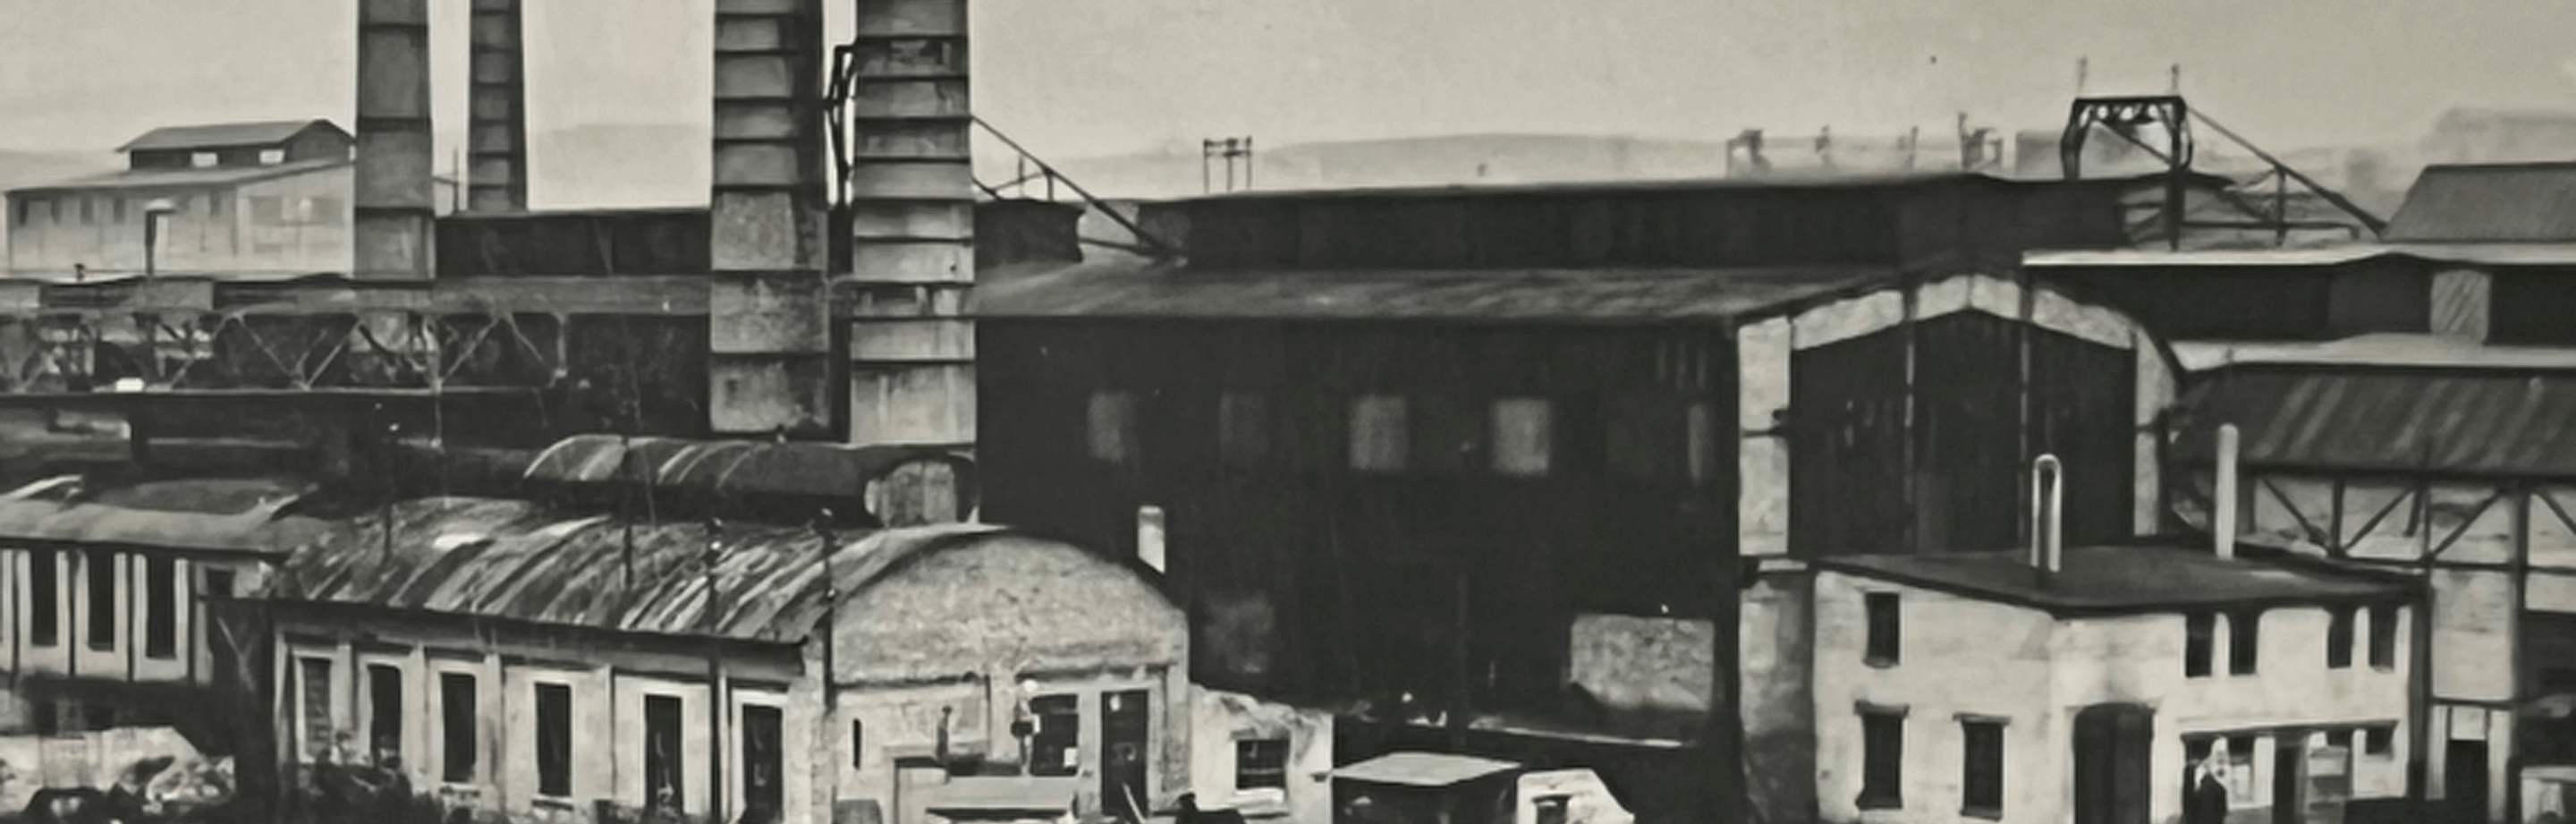 historic black and white photo of the outside of steel production site.